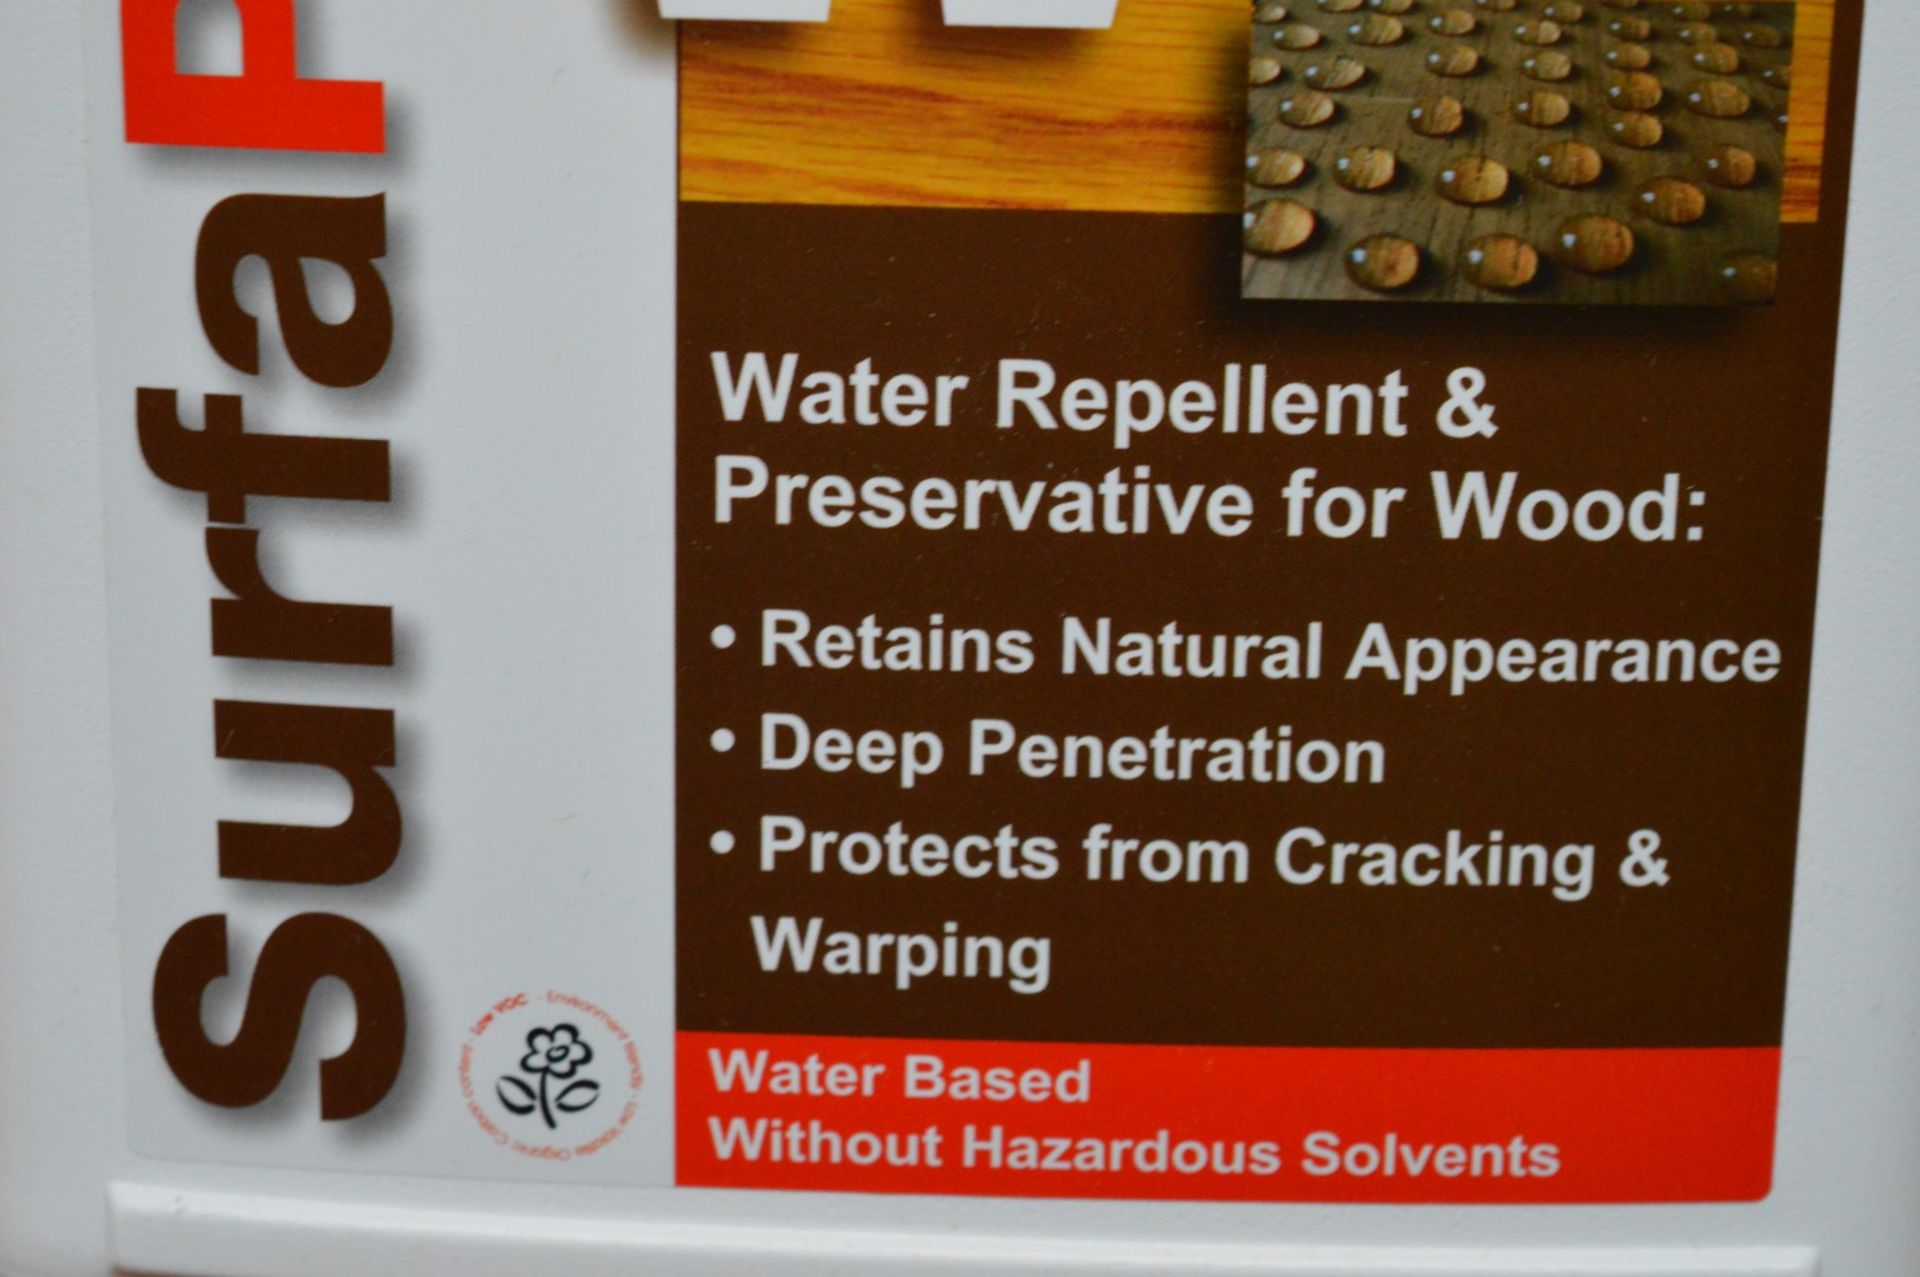 4 x Nanophos Surfapore W For Wood - Water Based Liquid Which Preserves and Protects Wood From - Image 3 of 5